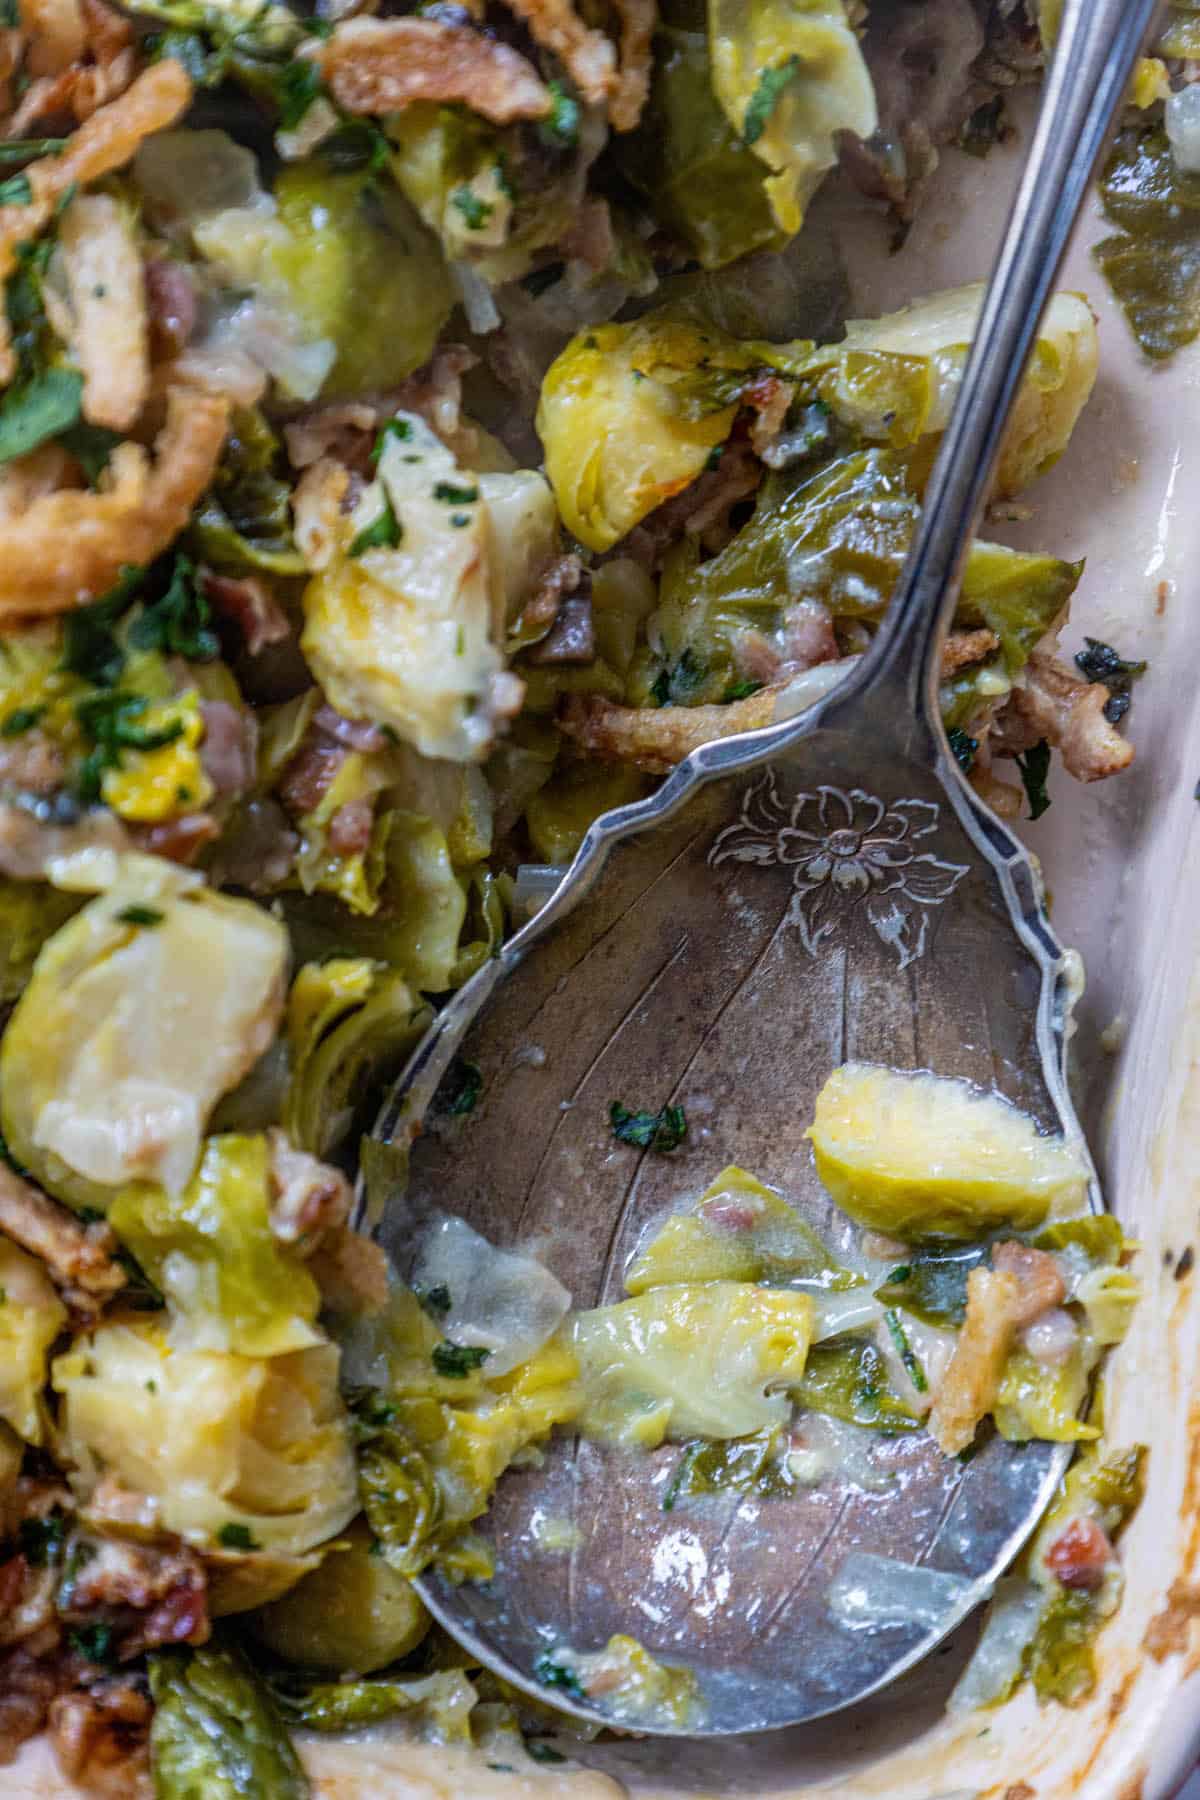 Creamy Brussels sprouts with bacon in a casserole dish.